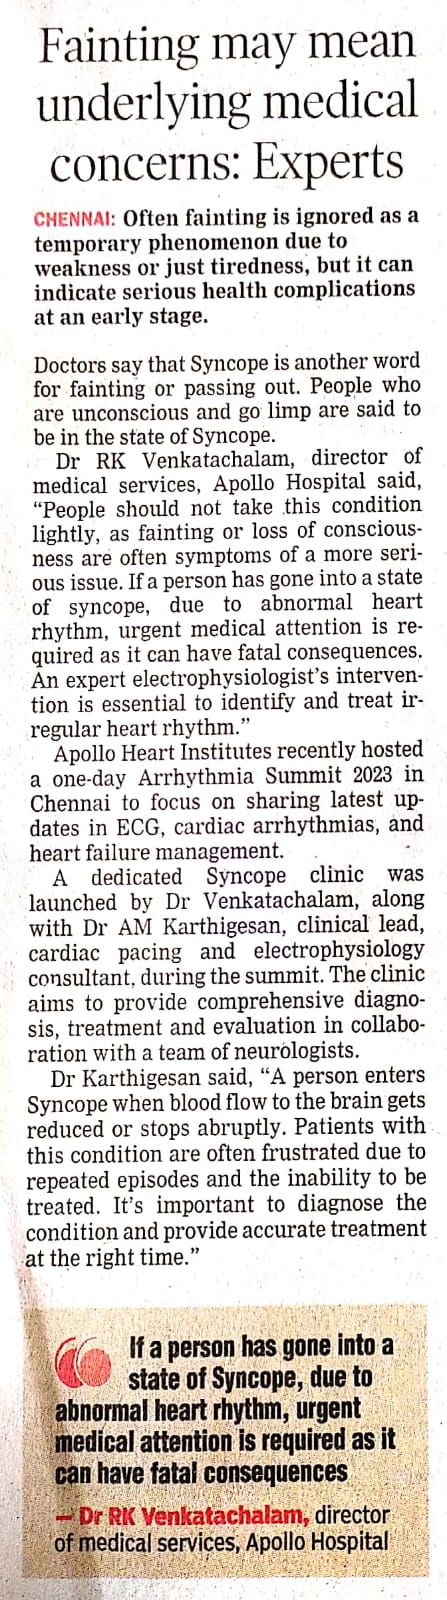 News article about Syncope and the launch of a dedicated Syncope clinic by Apollo Hospitals at the arrhythmia summit 2023.